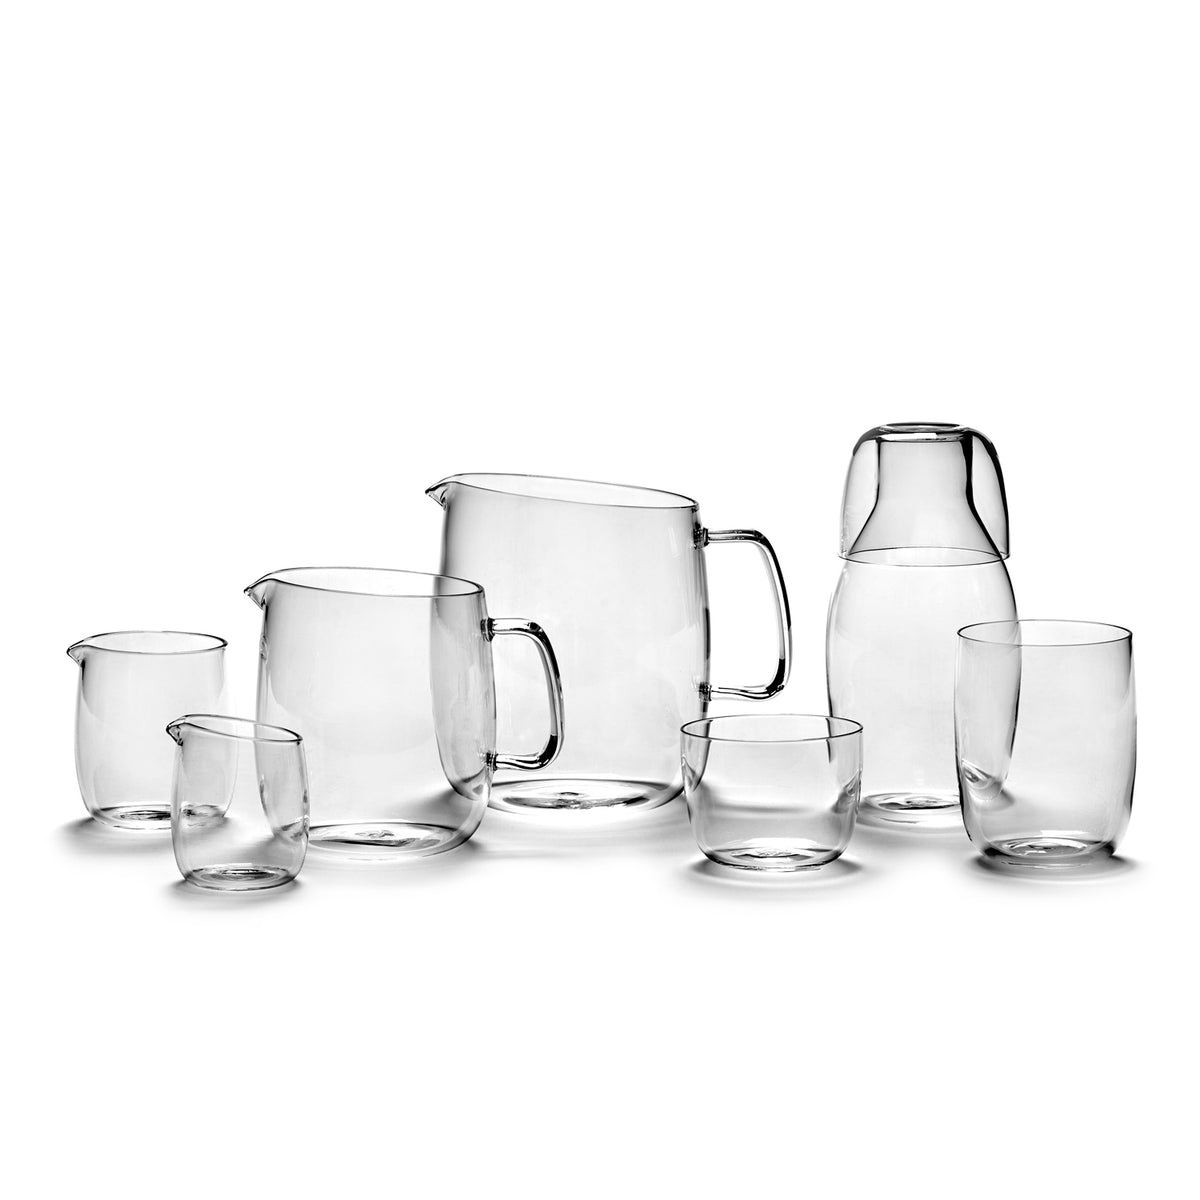 a picture of  Tall Glass on makers and merchants website